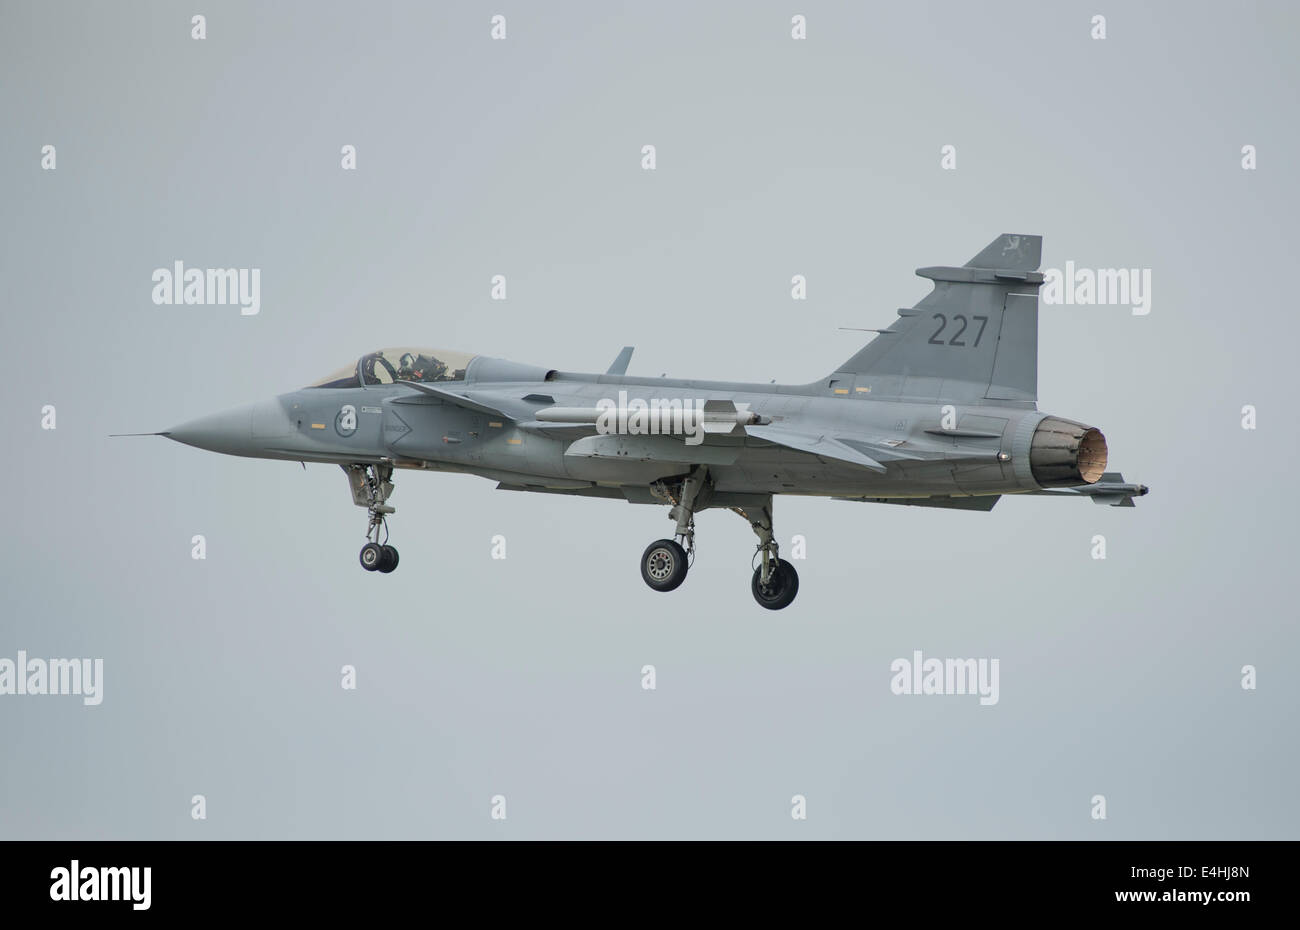 RAF Fairford, Gloucestershire UK. 11th July 2014. Fast jets on display at the first day of RIAT. Swedish Air Force Saab JAS 39C Gripen makes a low speed fly-past with undercarriage down. Credit:  Malcolm Park editorial/Alamy Live News Stock Photo